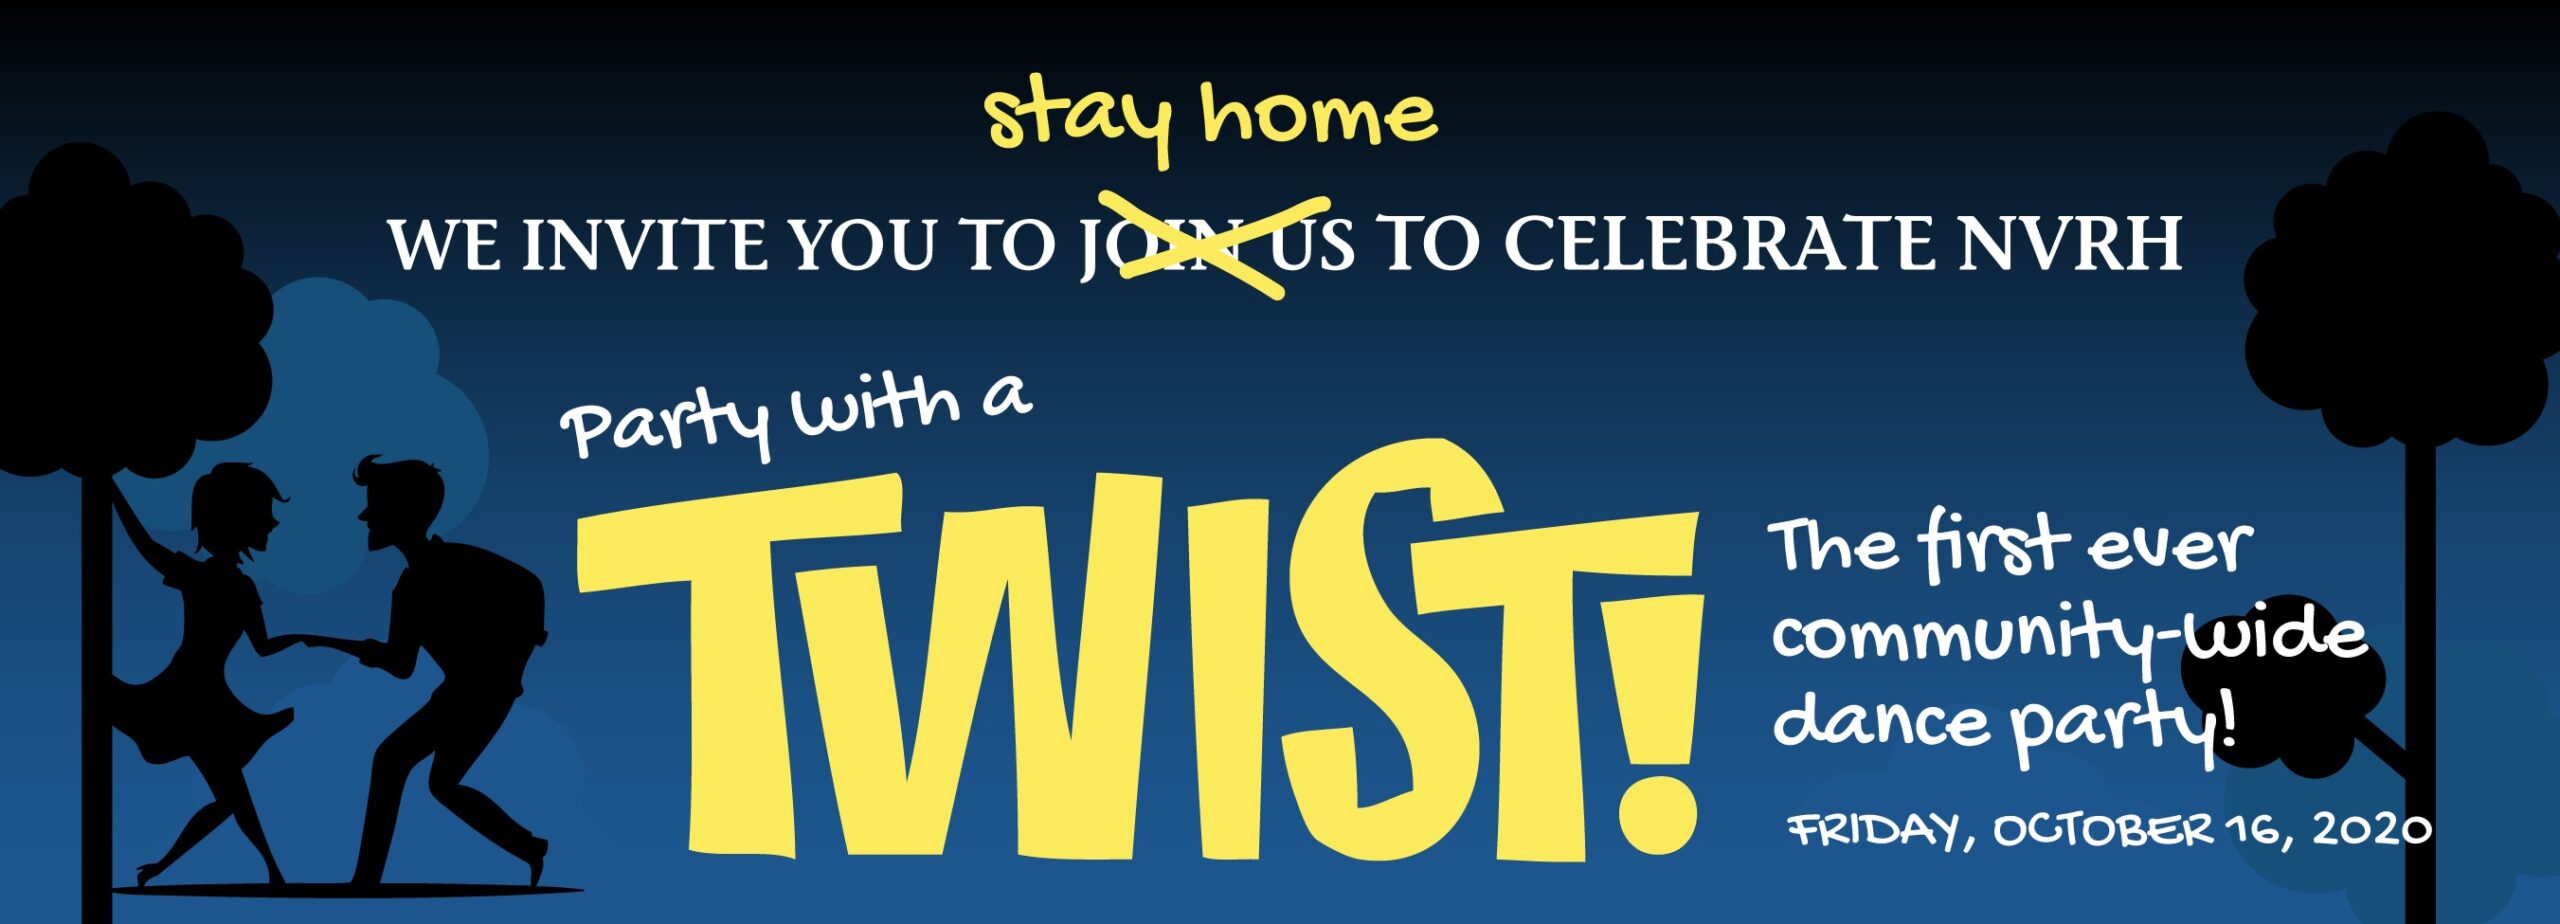 NVRH invites you to stay home and celebrate with a TWIST.